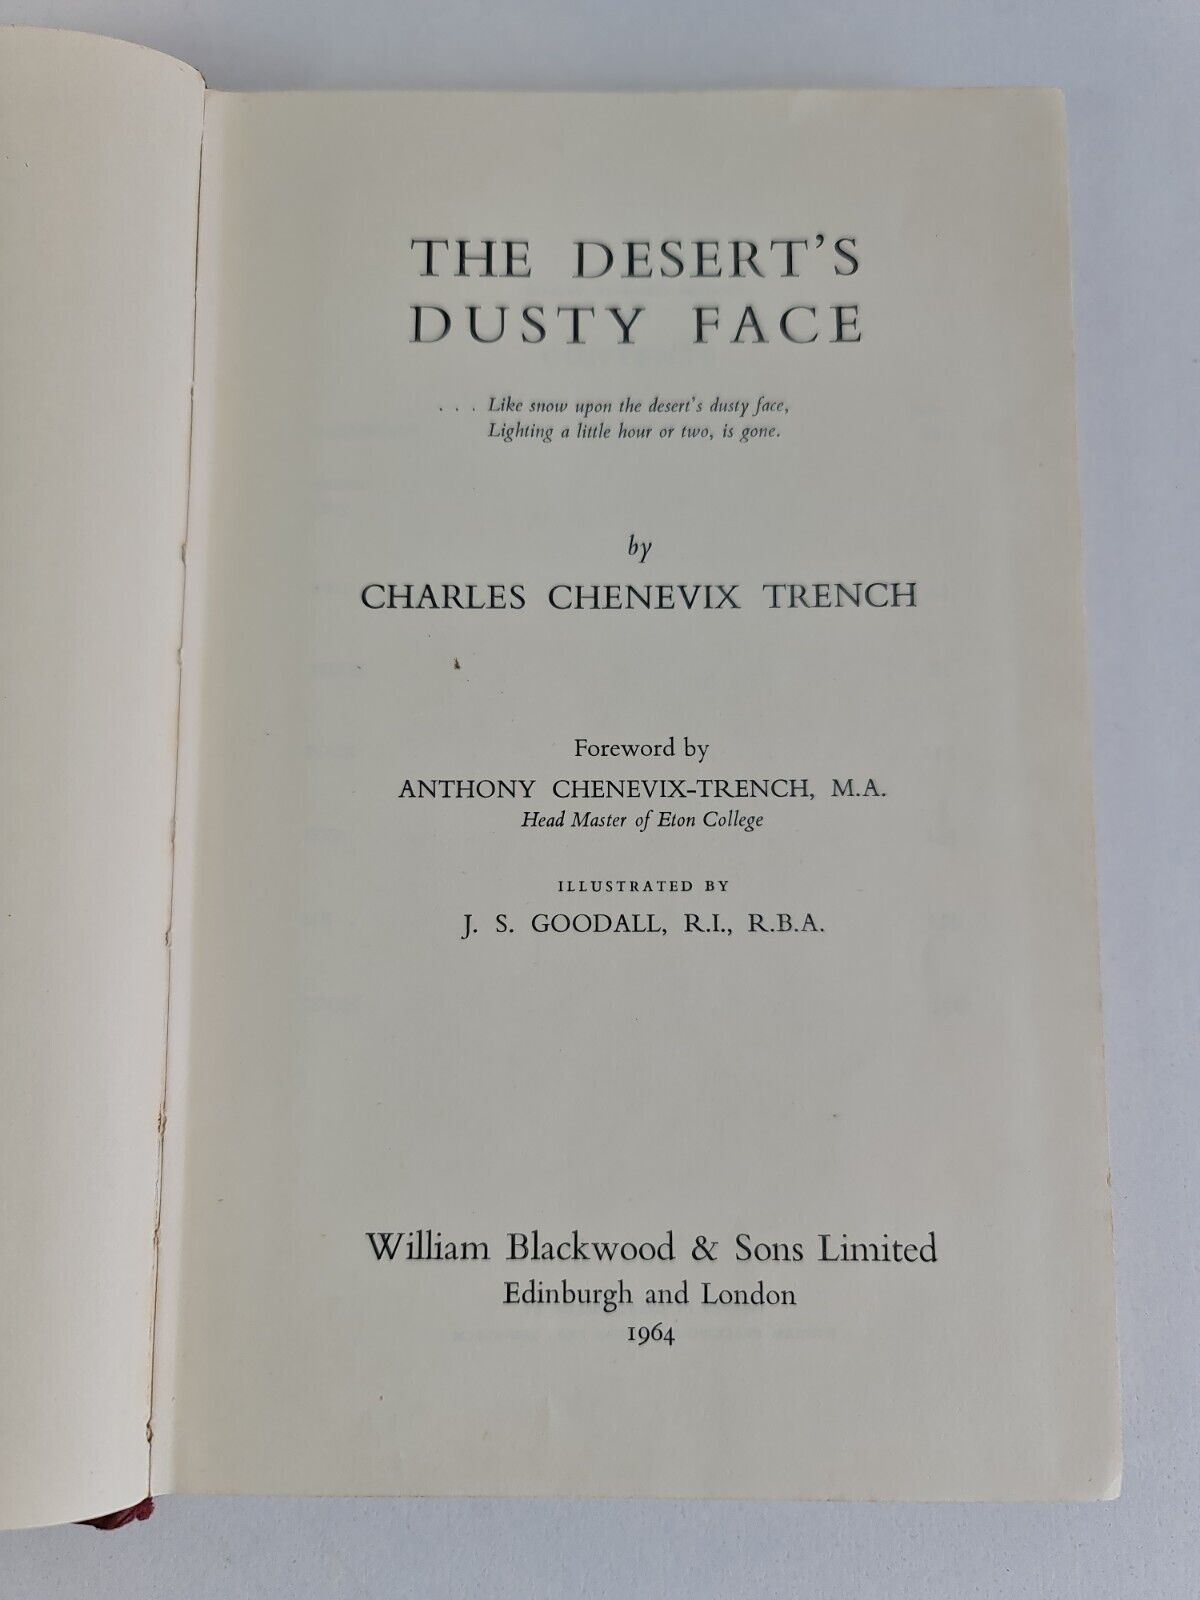 The Desert's Dusty Face by Charles C Trench (1964)